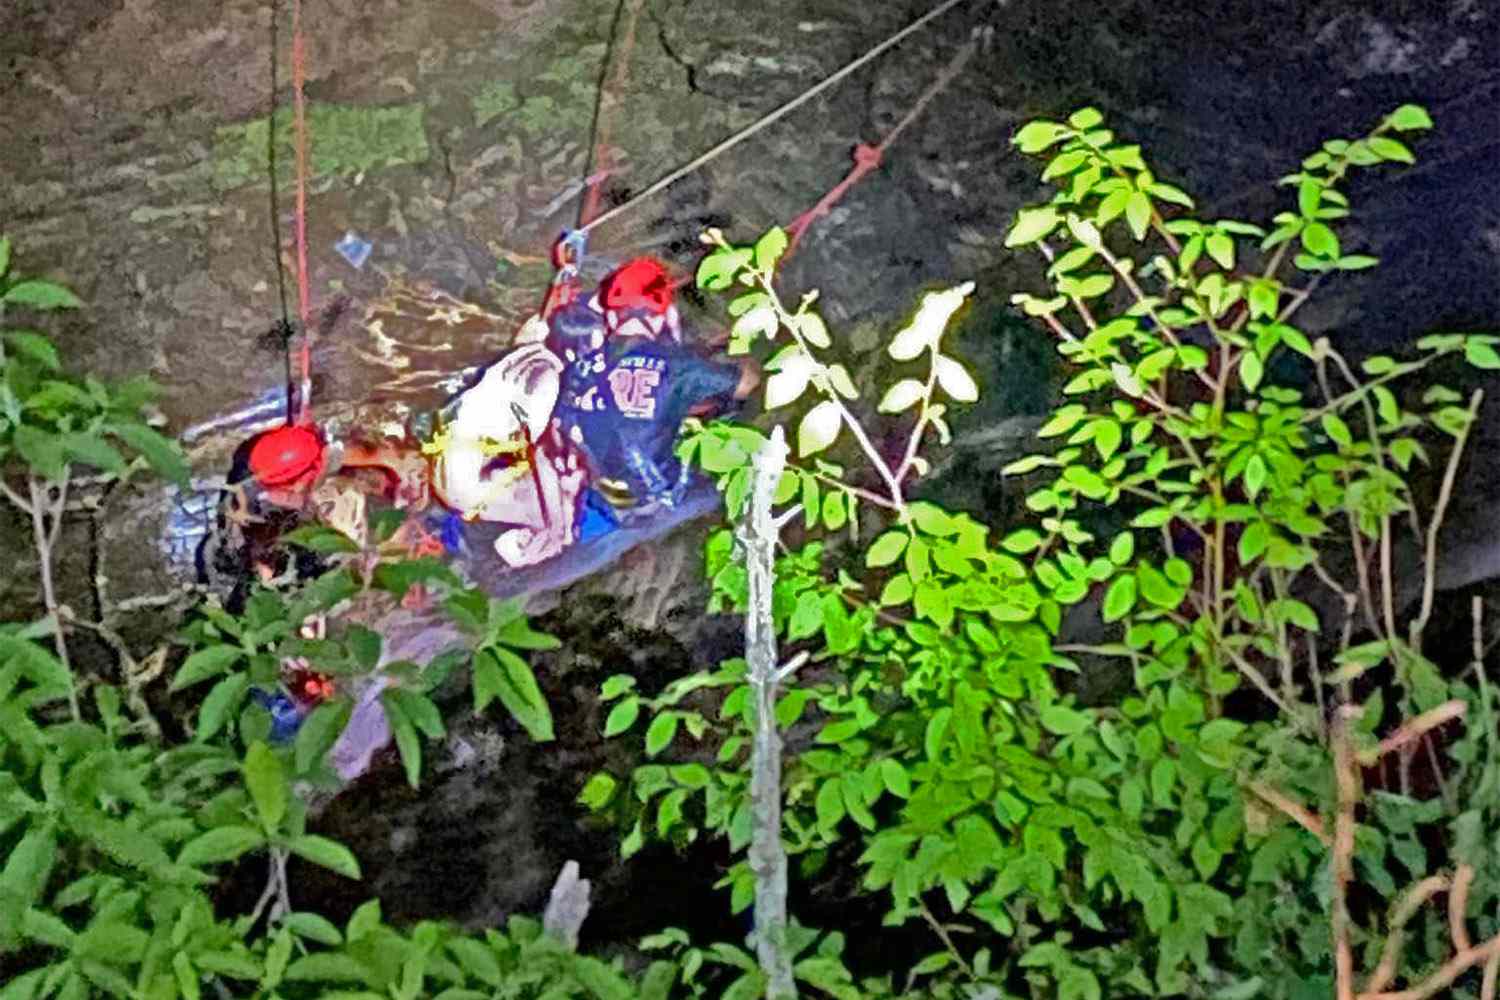 Georgia Hiker Rescued After Falling Nearly 50 Feet Off the Edge of a Waterfall